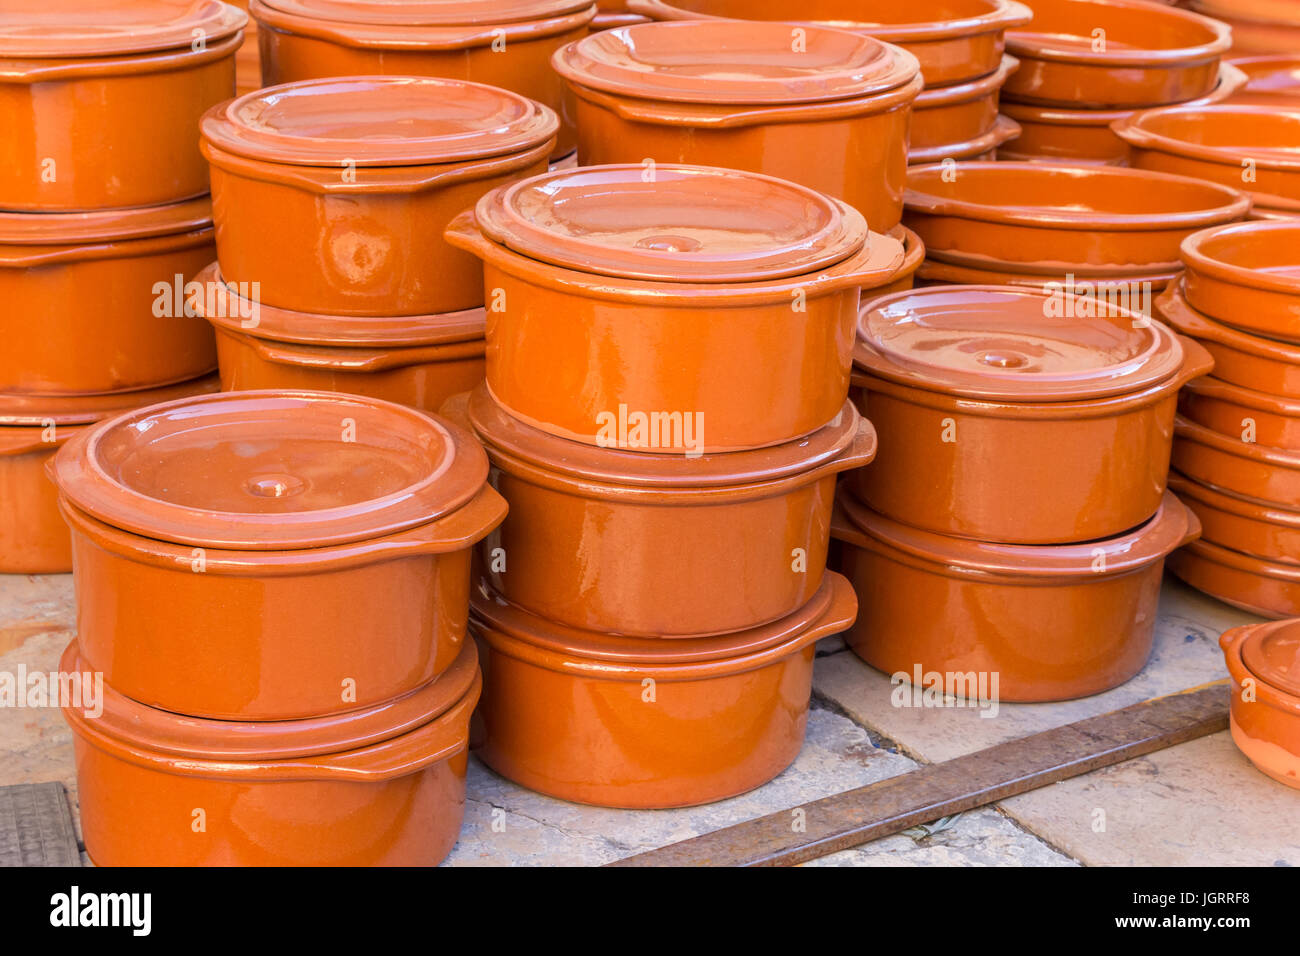 https://c8.alamy.com/comp/JGRRF8/traditional-spanish-cooking-pots-at-the-tourist-market-on-the-plaza-JGRRF8.jpg